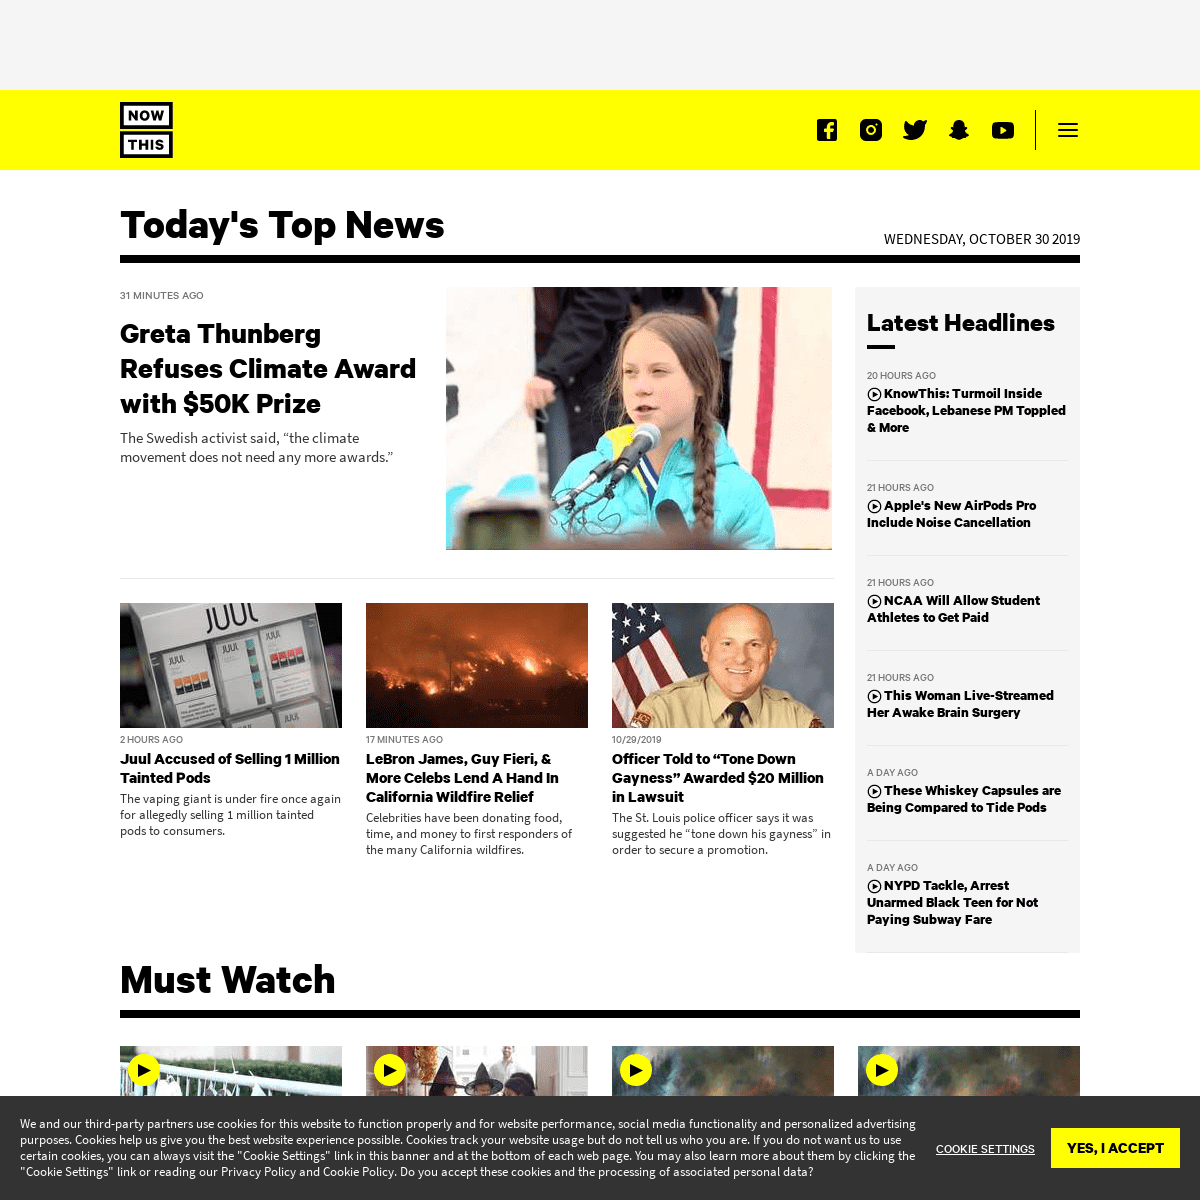 A complete backup of nowthisnews.com